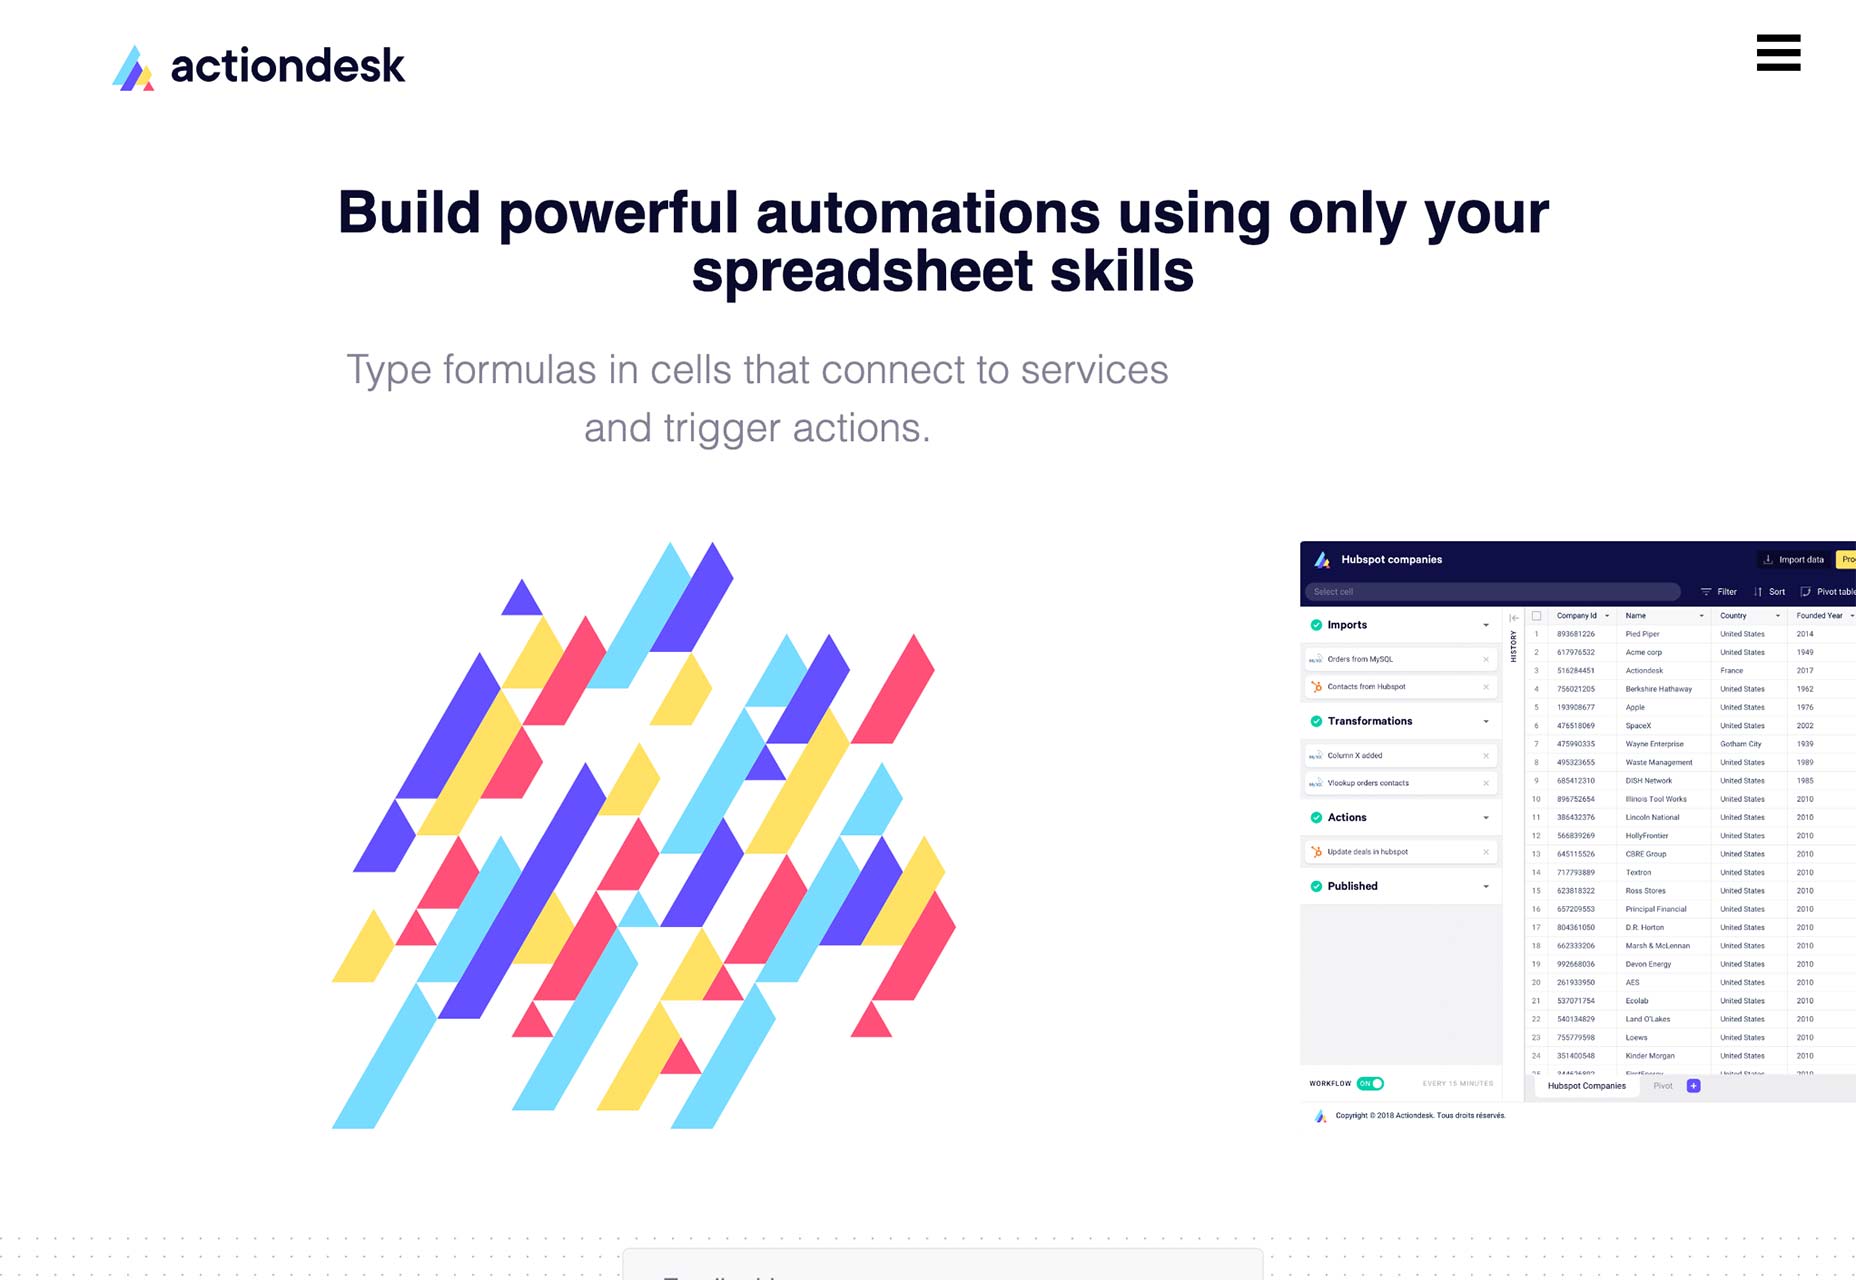 actiondesk